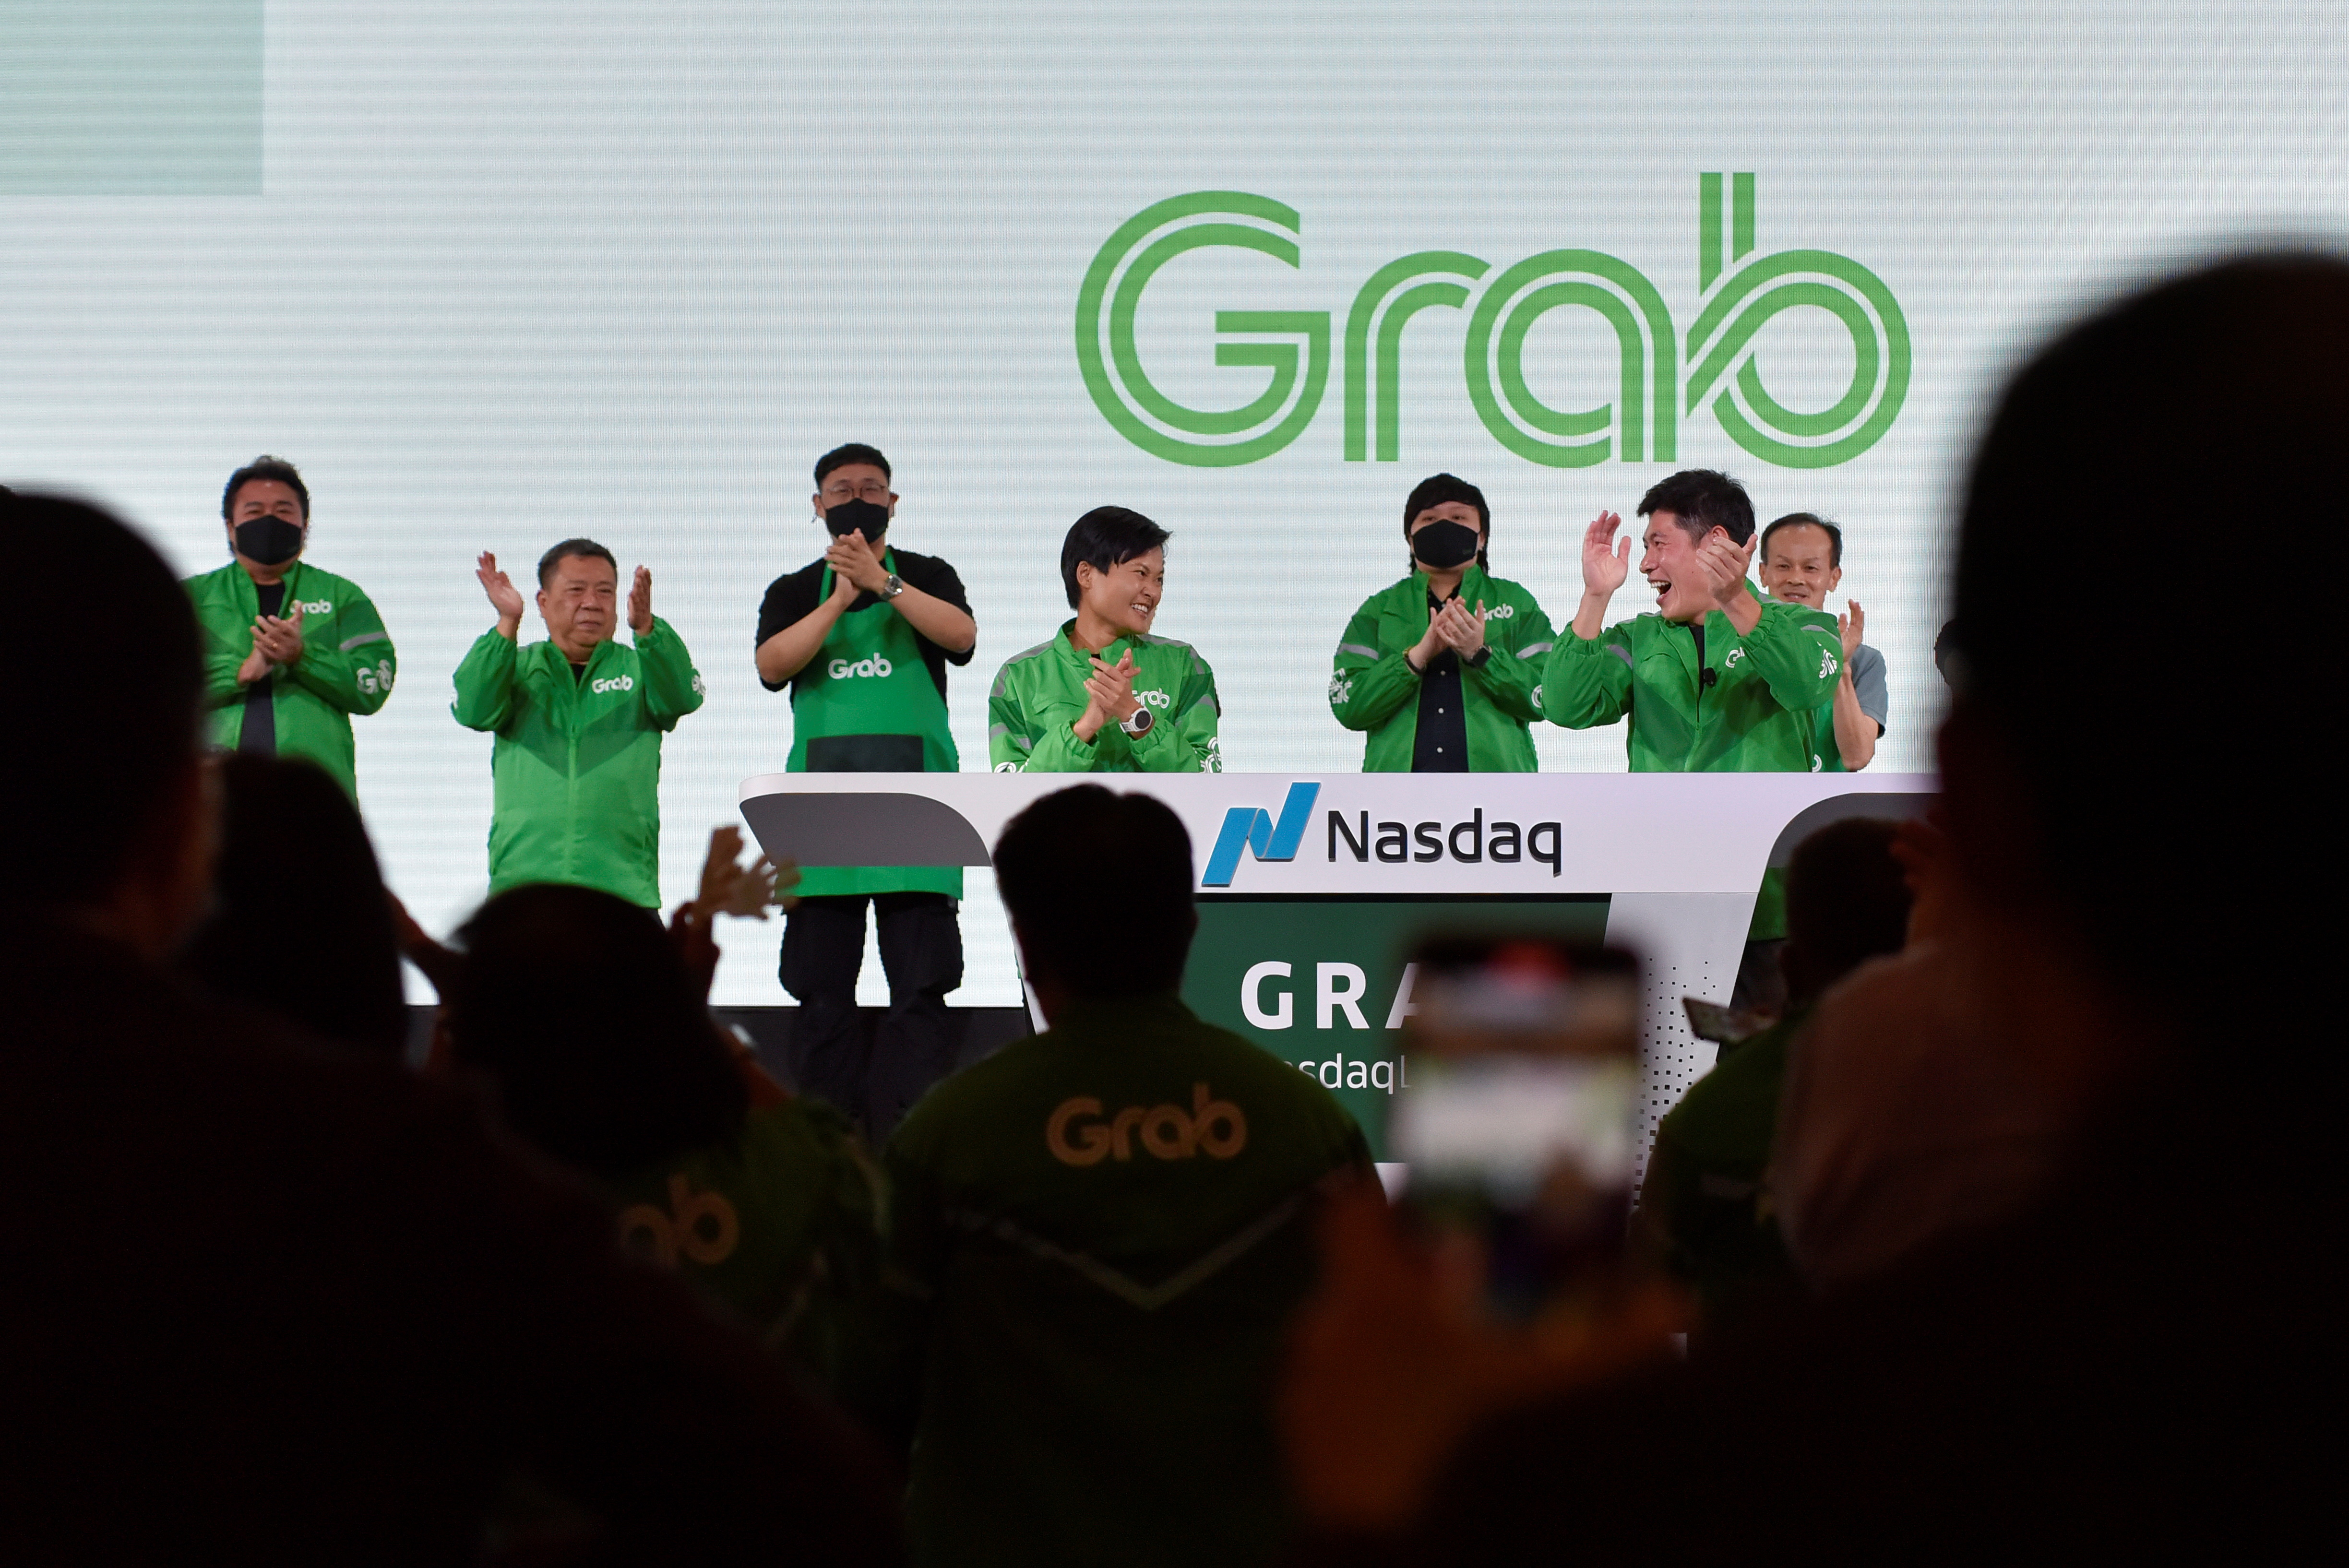 Nasdaq debut: Grab's CEO Anthony Tan and co-founder Tan Hooi Ling gestures on stage as they attend the Grab Bell Ringing Ceremony at a hotel in Singapore on Thursday Dec 2, 2021. (Photo by Caroline Chia/Reuters)